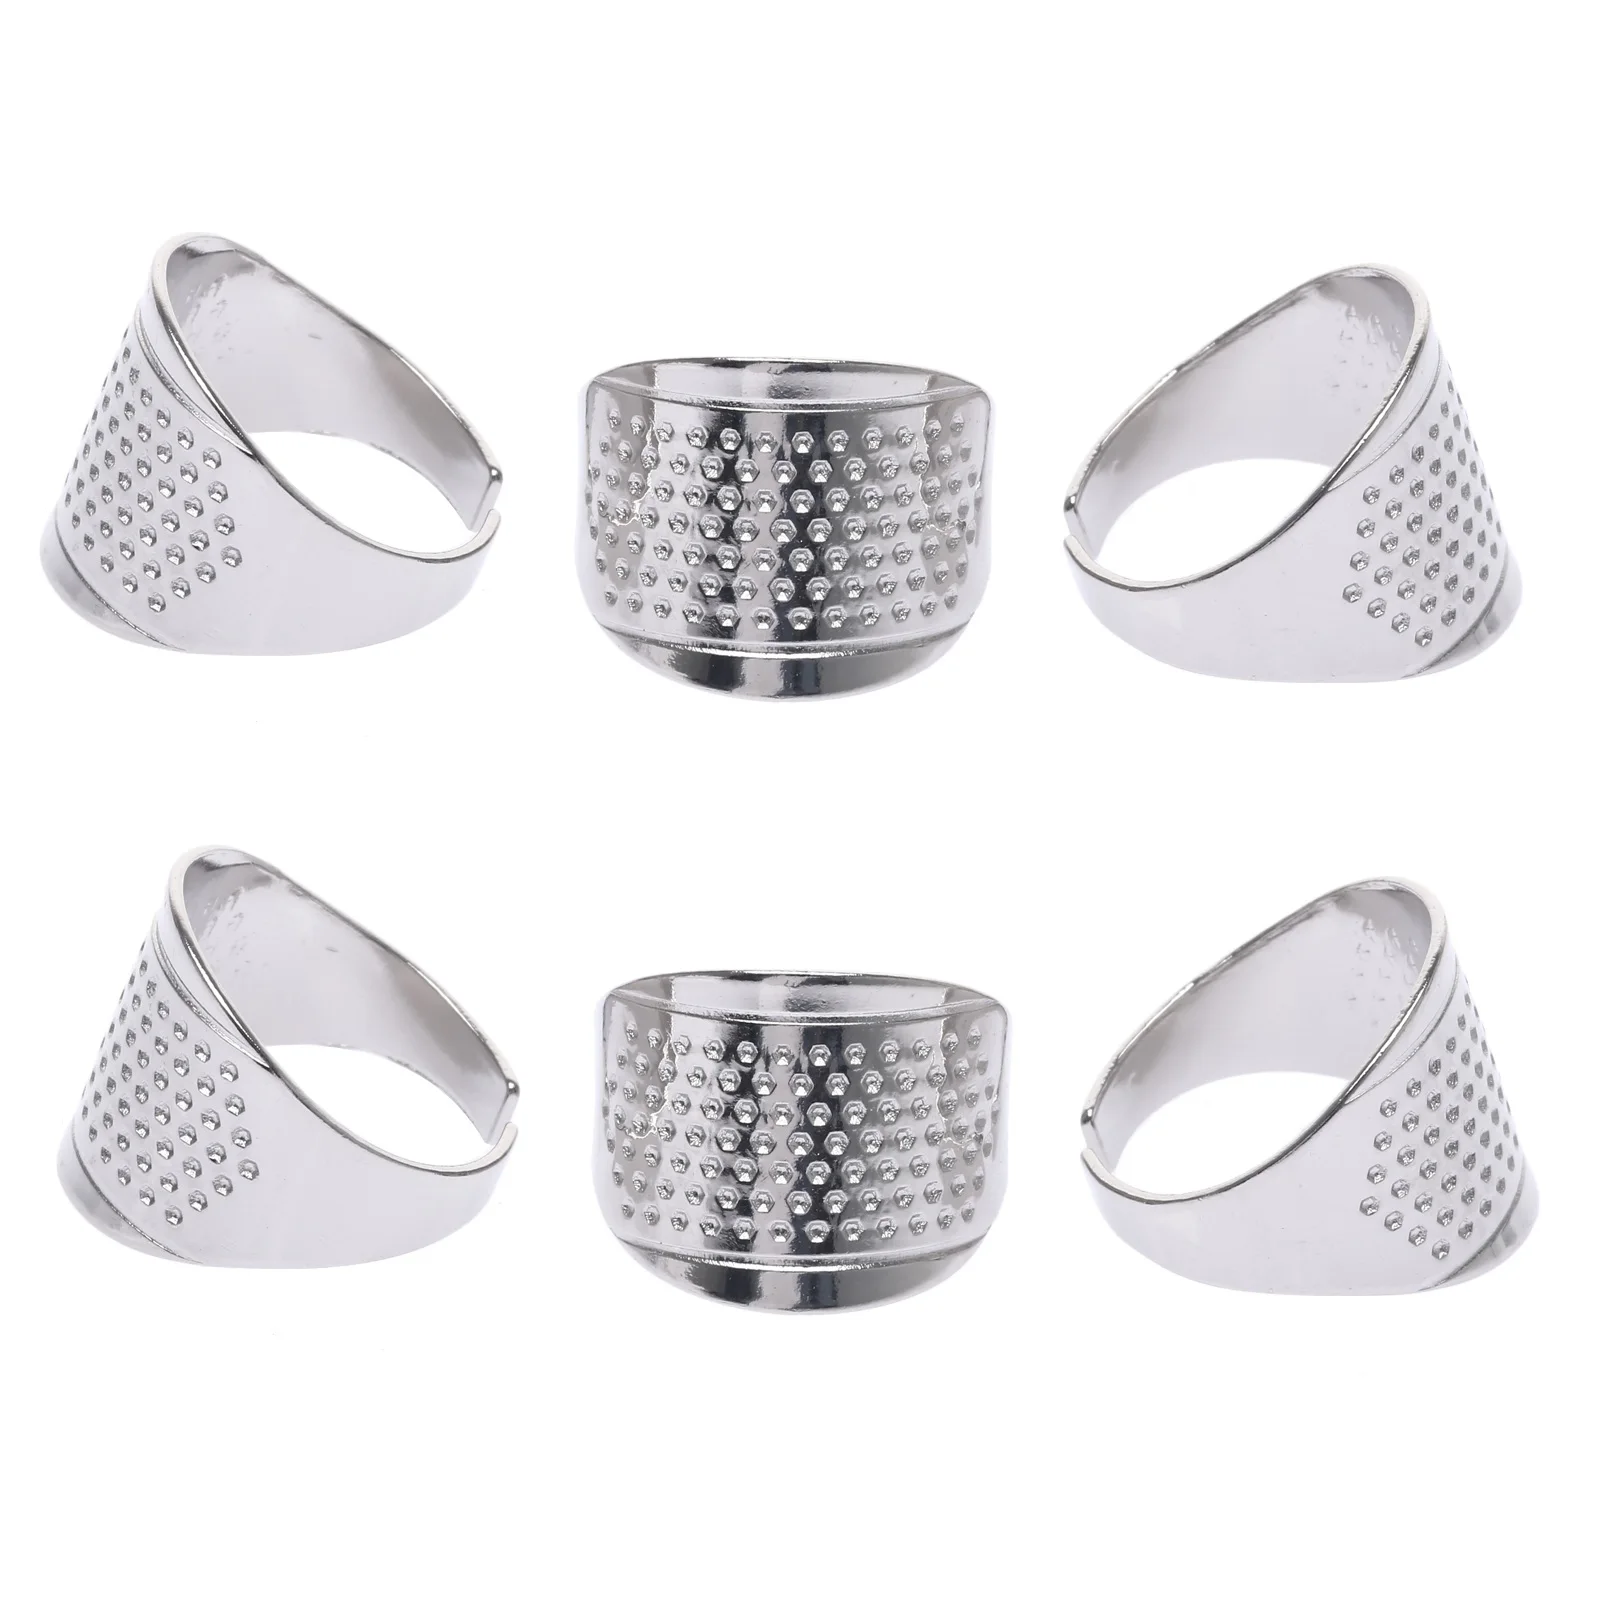 Silver Metal Thimble Leather Thimbles for Hand Sewing 6Pcs Sewing Thimble  Cap